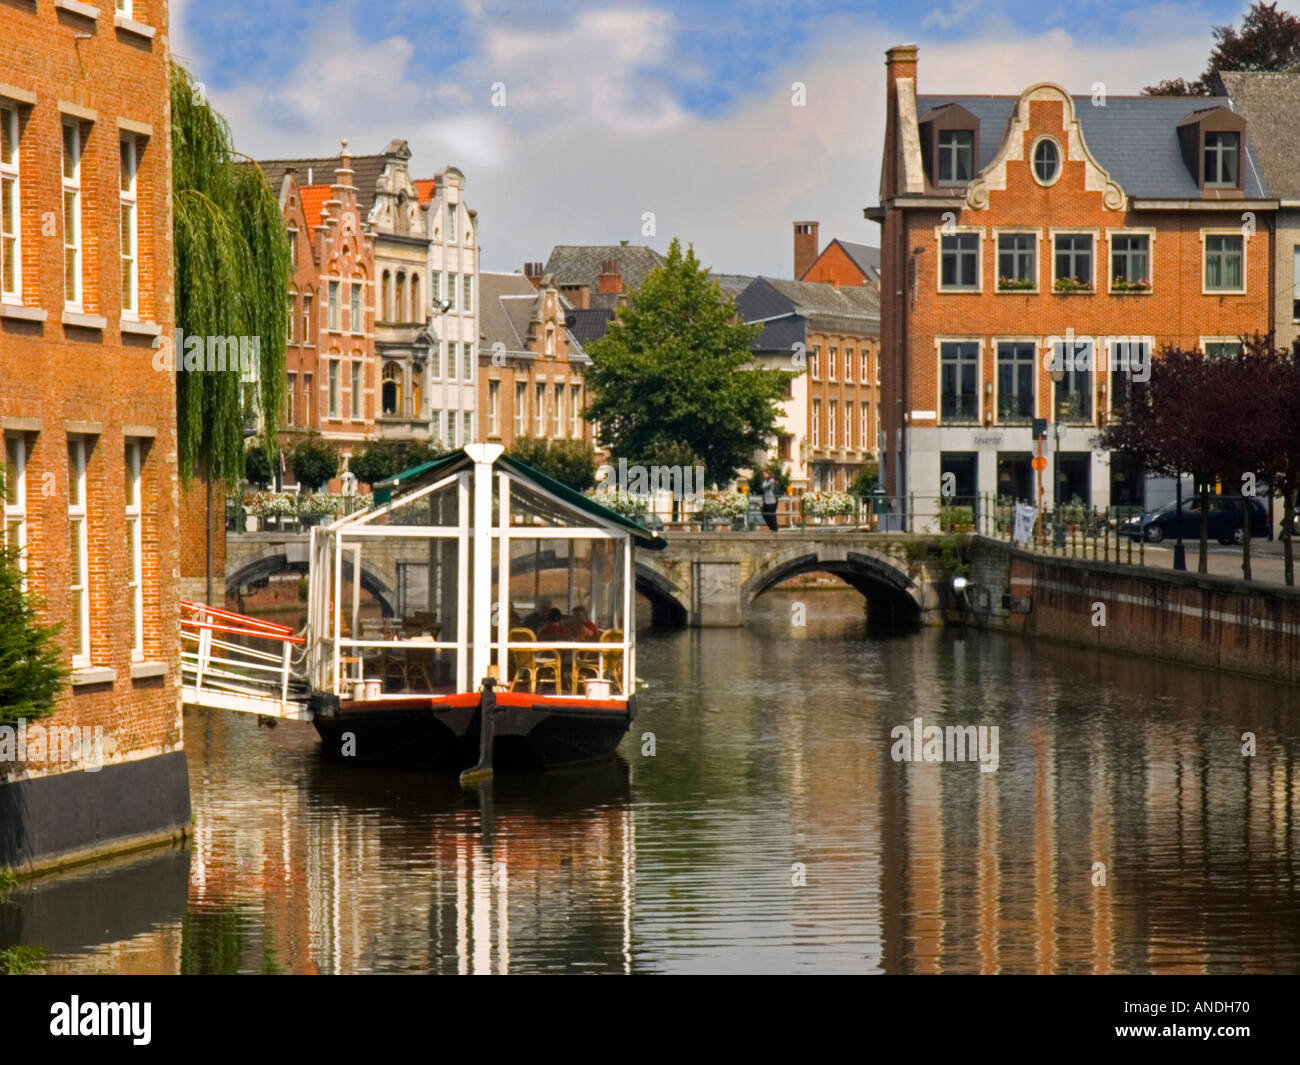 Old town Lier Belgium travel architect architecture facade medieval middle ages house canal channel waterway river bridge restau Stock Photo